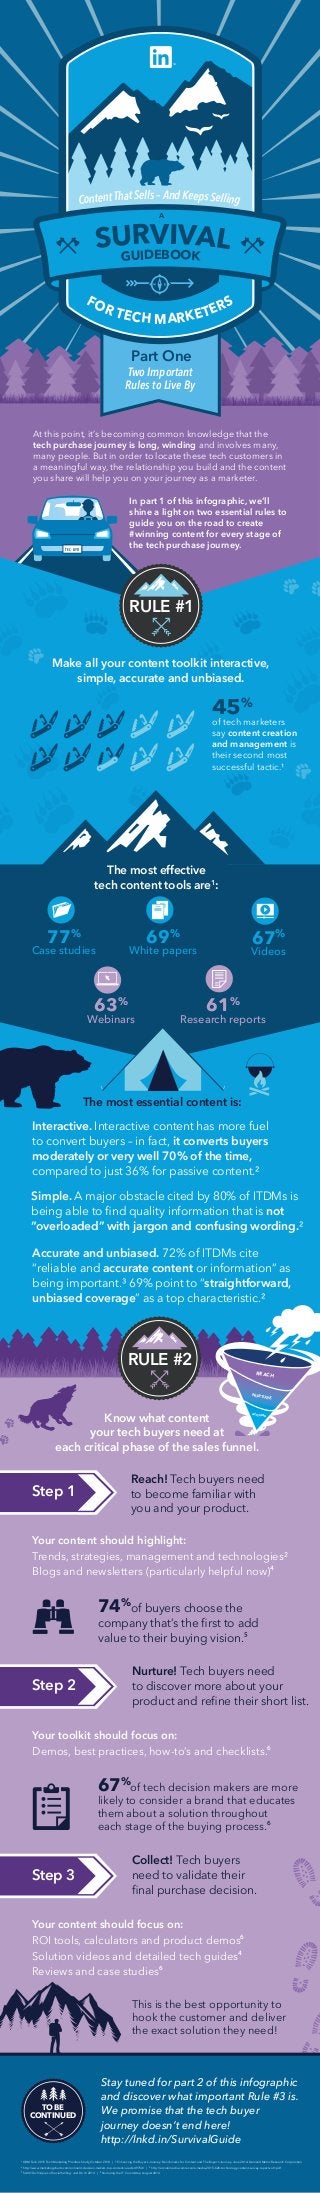 FOR TECH MARKETERS
At this point, it’s becoming common knowledge that the
tech purchase journey is long, winding and involves many,
many people. But in order to locate these tech customers in
a meaningful way, the relationship you build and the content
you share will help you on your journey as a marketer.
In part 1 of this infographic, we’ll
shine a light on two essential rules to
guide you on the road to create
#winning content for every stage of
the tech purchase journey.
Make all your content toolkit interactive,
simple, accurate and unbiased.
The most essential content is:
Interactive. Interactive content has more fuel
to convert buyers – in fact, it converts buyers
moderately or very well 70% of the time,
compared to just 36% for passive content.²
Simple. A major obstacle cited by 80% of ITDMs is
being able to ﬁnd quality information that is not
“overloaded” with jargon and confusing wording.²
Accurate and unbiased. 72% of ITDMs cite
“reliable and accurate content or information” as
being important.³ 69% point to “straightforward,
unbiased coverage” as a top characteristic.²
45%
of tech marketers
say content creation
and management is
their second most
successful tactic.¹
SURVIVALGUIDEBOOK
Part One
Content That Sells – And Keeps Selling
A
Two Important
Rules to Live By
TEC-BYR
77%
Case studies
69%
White papers
67%
Videos
63%
Webinars
61%
Research reports
RULE #2
Reach! Tech buyers need
to become familiar with
you and your product.
Your content should highlight:
Trends, strategies, management and technologies²
Blogs and newsletters (particularly helpful now)4
74%
of buyers choose the
company that’s the ﬁrst to add
value to their buying vision.5
Nurture! Tech buyers need
to discover more about your
product and reﬁne their short list.
Your toolkit should focus on:
Demos, best practices, how-to’s and checklists.6
67%
of tech decision makers are more
likely to consider a brand that educates
them about a solution throughout
each stage of the buying process.6
RULE #1
Stay tuned for part 2 of this infographic
and discover what important Rule #3 is.
We promise that the tech buyer
journey doesn’t end here!
http://lnkd.in/SurvivalGuide
The most effective
tech content tools are1
:
Step 1
REACH
NURTURE
ACQUIRE
Know what content
your tech buyers need at
each critical phase of the sales funnel.
Step 2
Collect! Tech buyers
need to validate their
ﬁnal purchase decision.
Your content should focus on:
ROI tools, calculators and product demos6
Solution videos and detailed tech guides4
Reviews and case studies6
This is the best opportunity to
hook the customer and deliver
the exact solution they need!
Step 3
TO BE
CONTINUED
¹ UBM Tech 2015 Tech Marketing Priorities Study, October 2014 | ² Enhancing the Buyer’s Journey: Benchmarks for Content and The Buyer’s Journey. June 2014. Demand Metric Research Corporation
³ http://www.marketingcharts.com/online/it-decision-makers-top-content-needs-49754/ | 4 http://eccolomedia.com/eccolo-media-2015-b2b-technology-content-survey-report-vol1.pdf
5 SAVO Techniques of Social Selling: Just Do It! 2014 | 6 Nurturing the IT Committee, August 2014
 